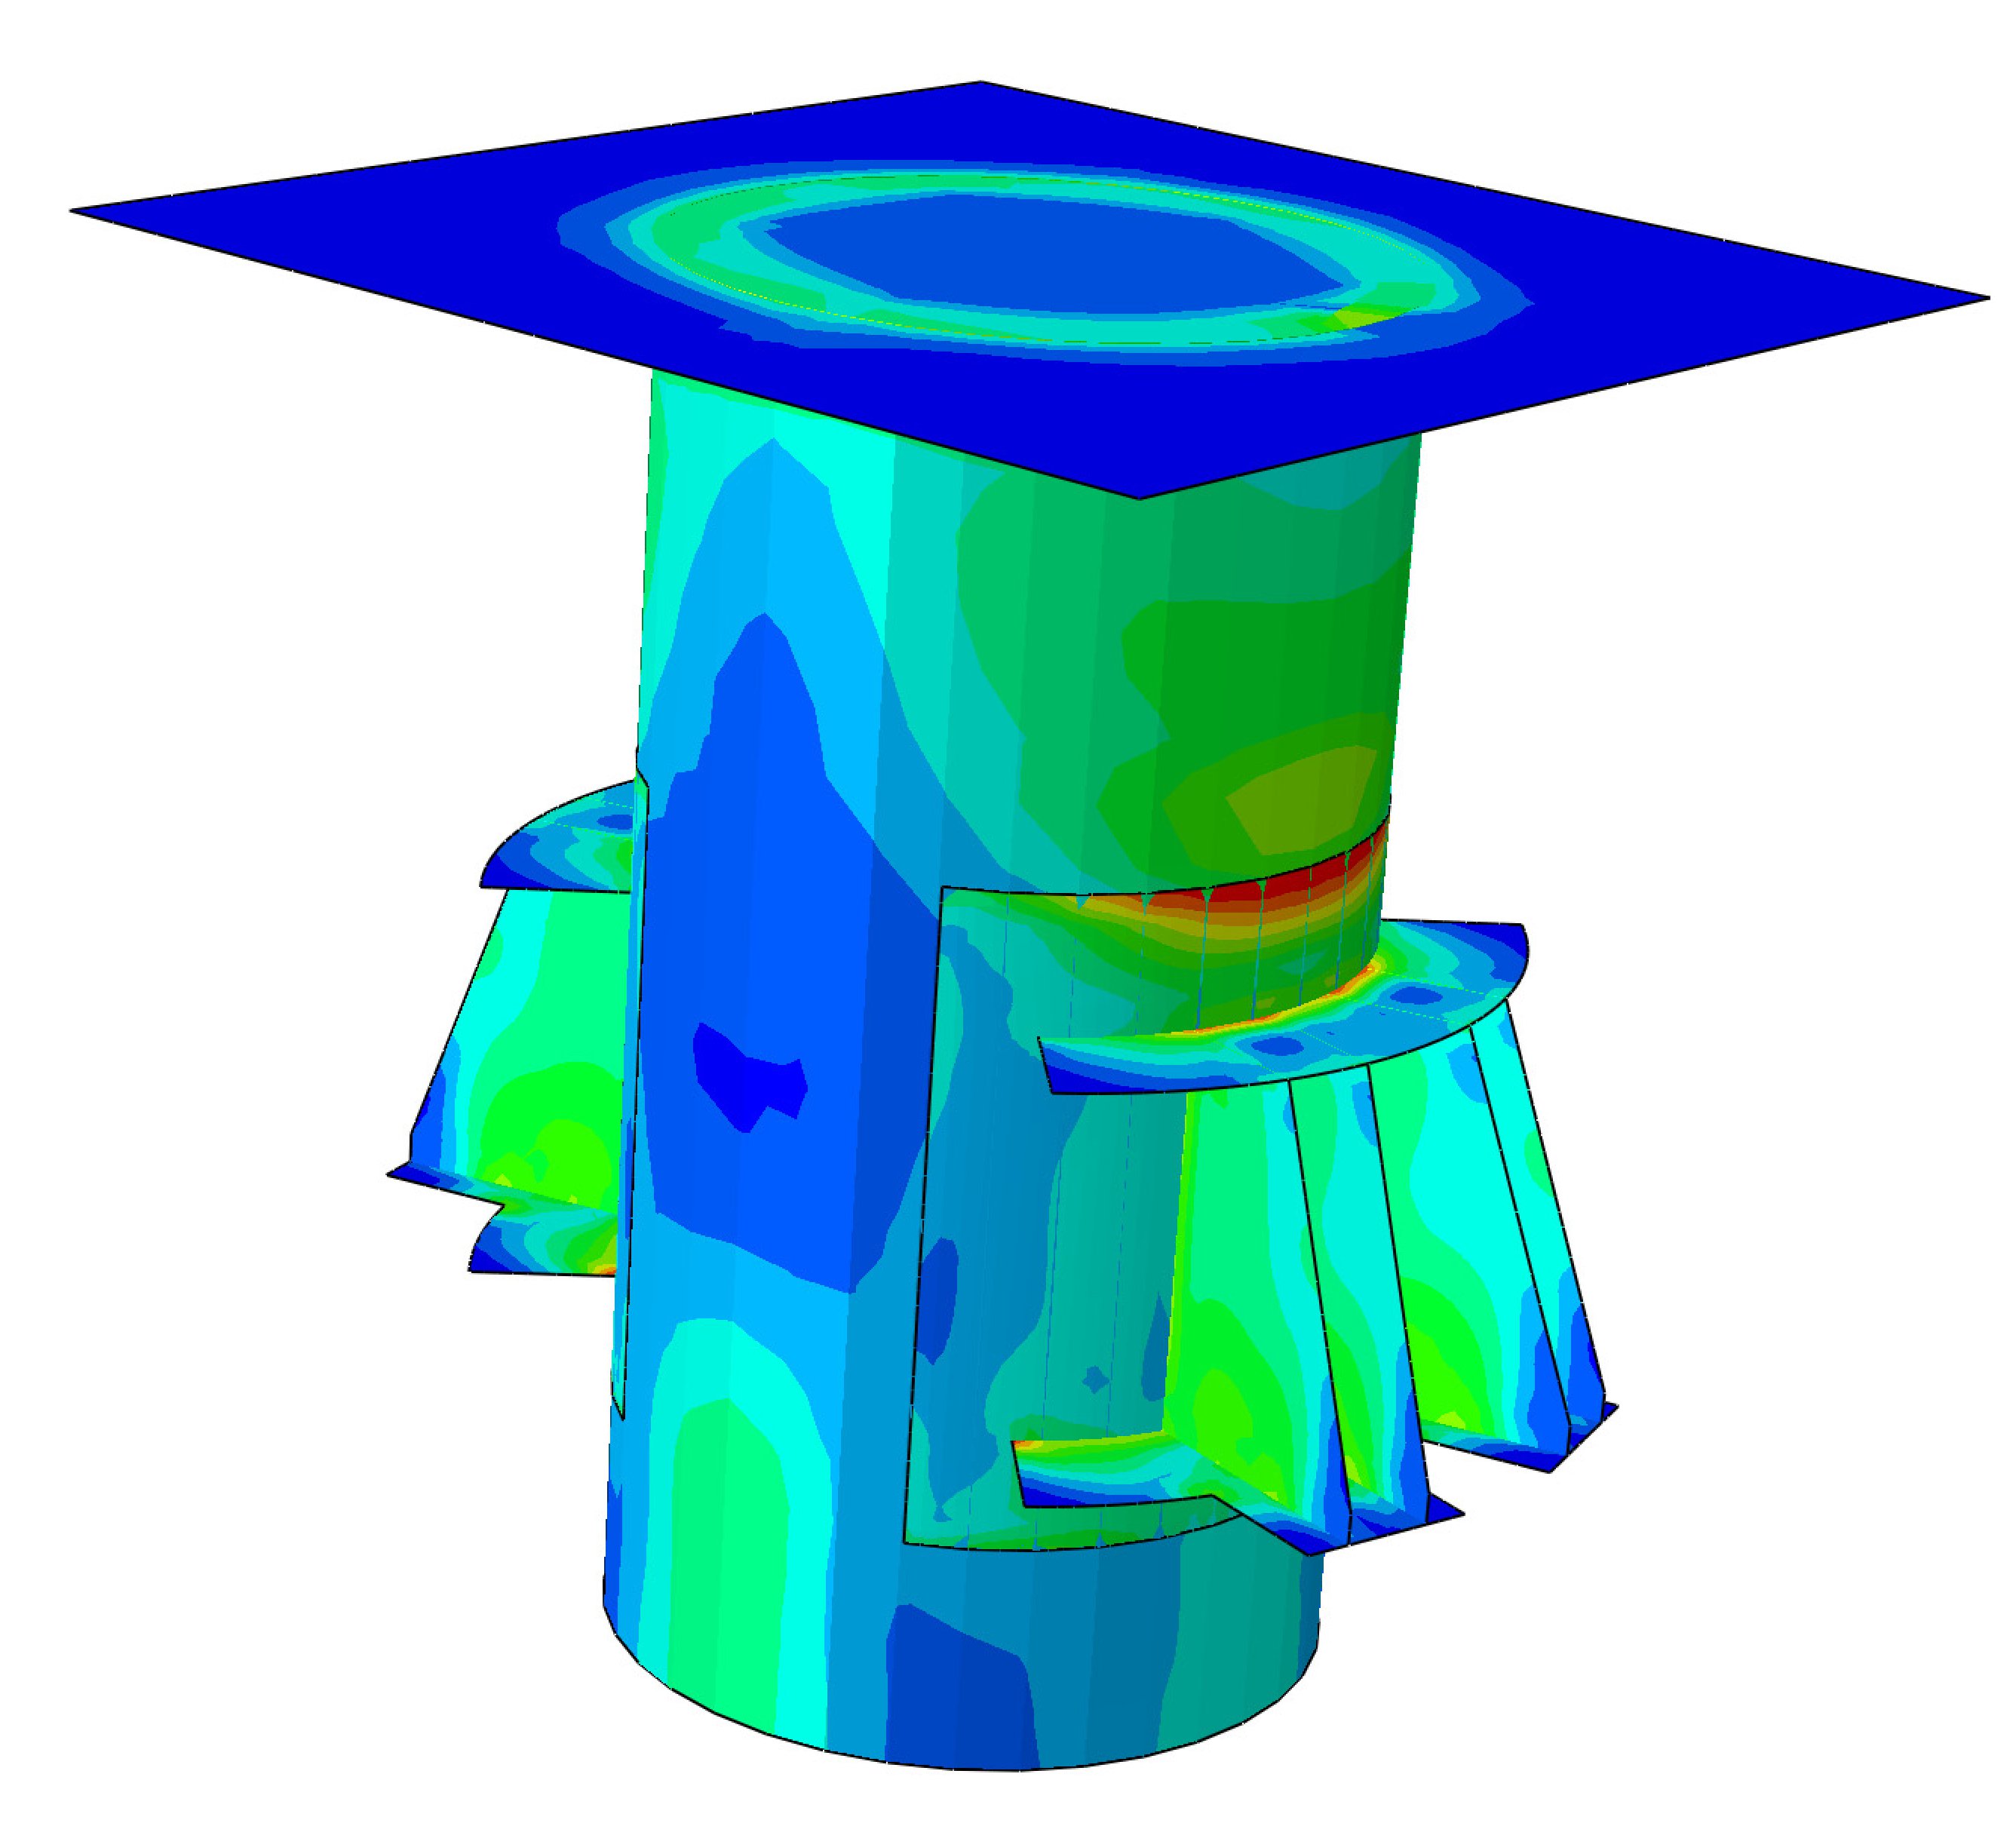 Finite element analysis results